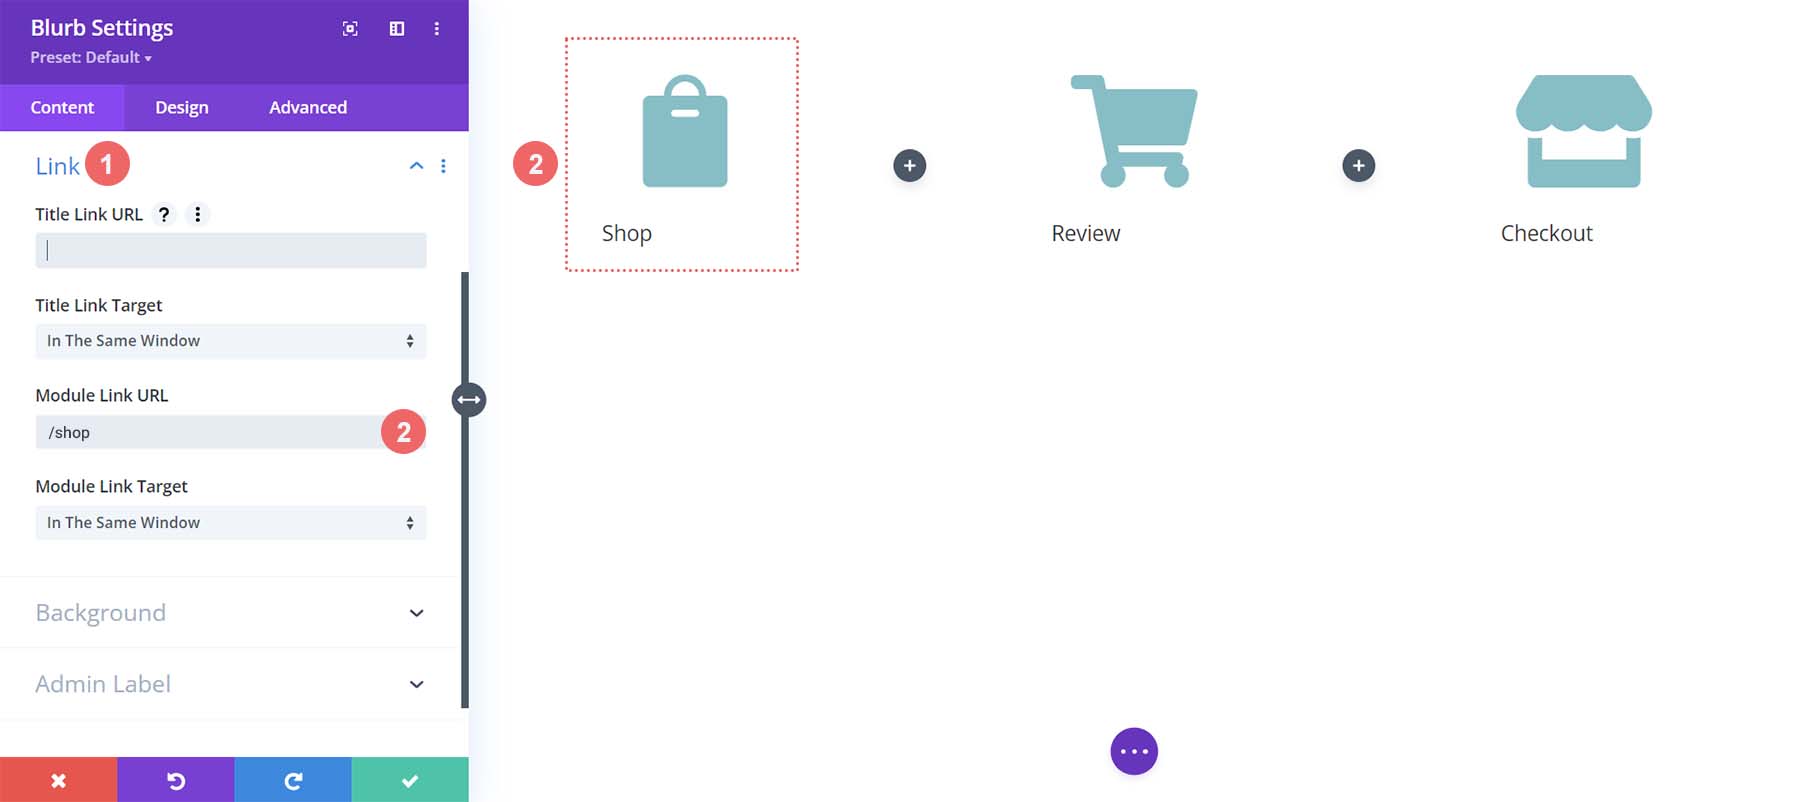 Add /shop link to link to the default WooCommerce Shop page link